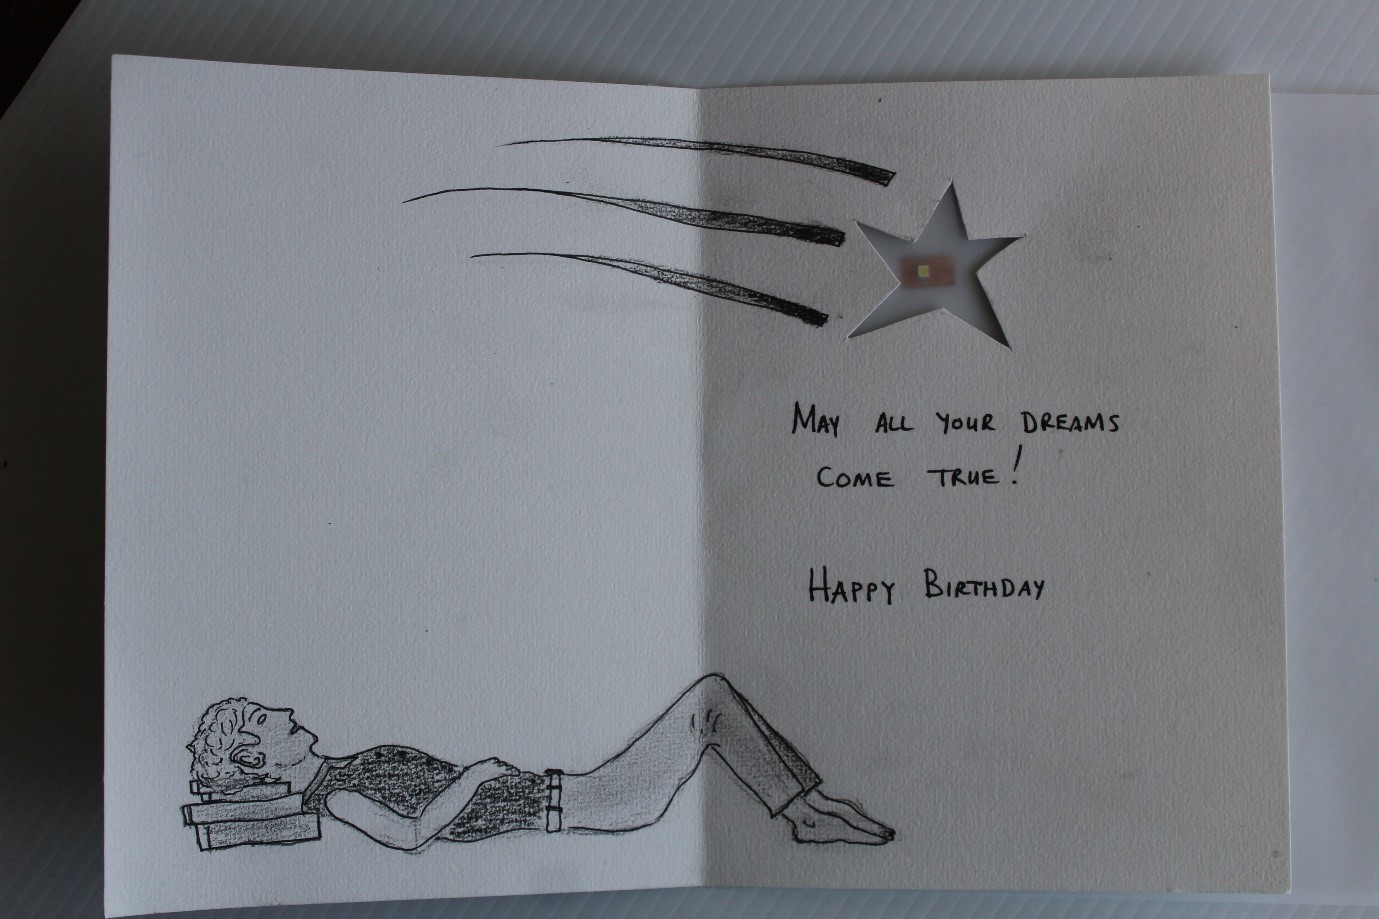 IMAGE: Greeting card with flashing star. Greyscale (pencil & ink pens). Credit: W Van Zyl